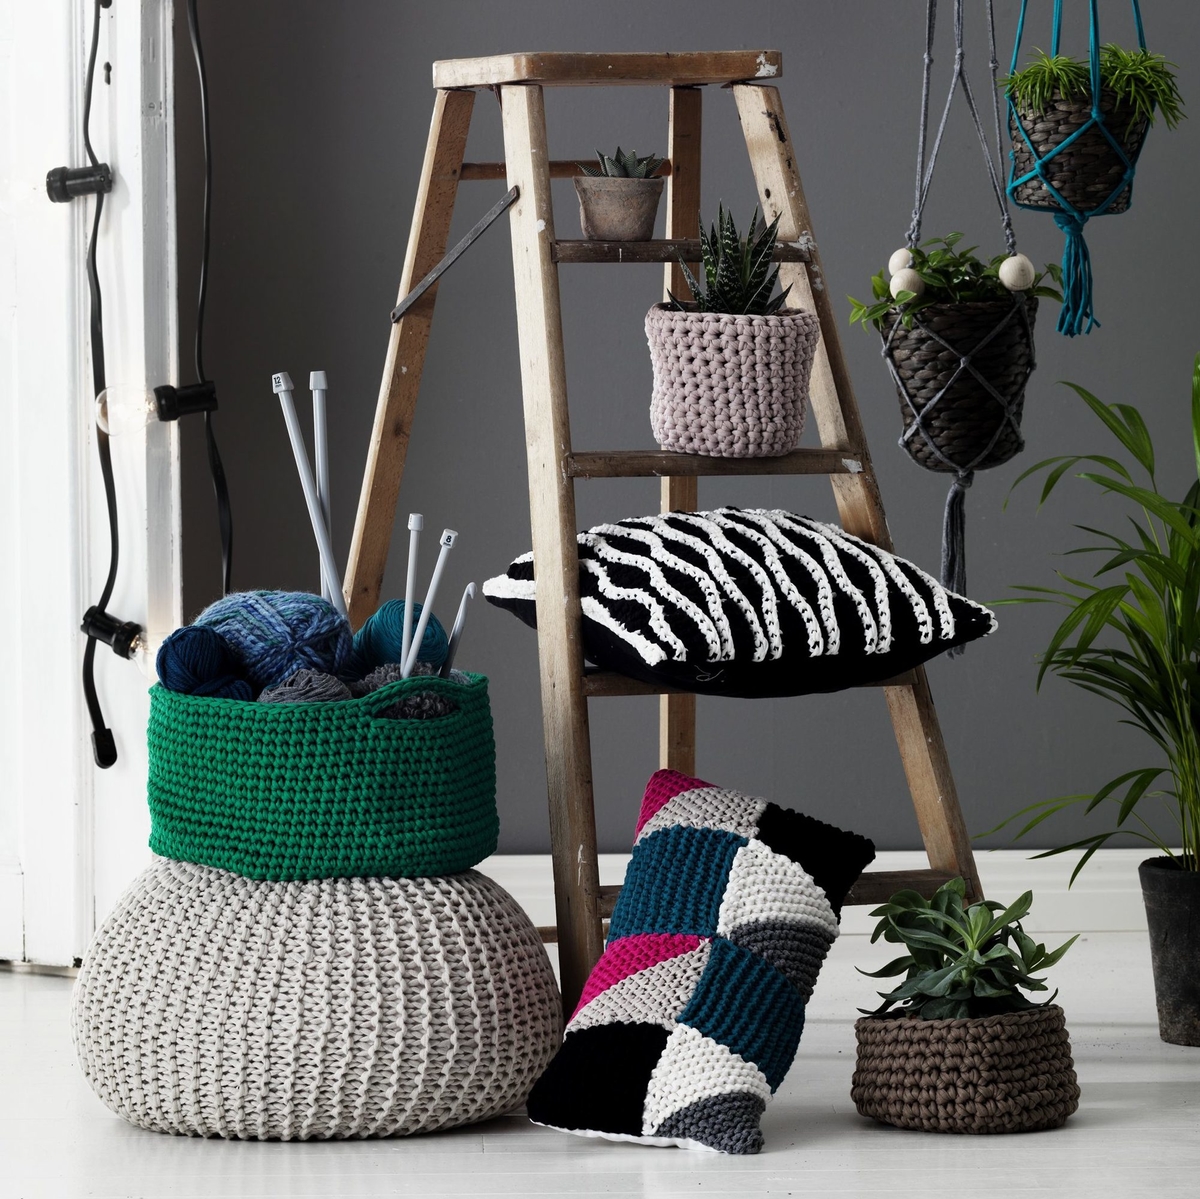 Trendy decor with tricot yarn